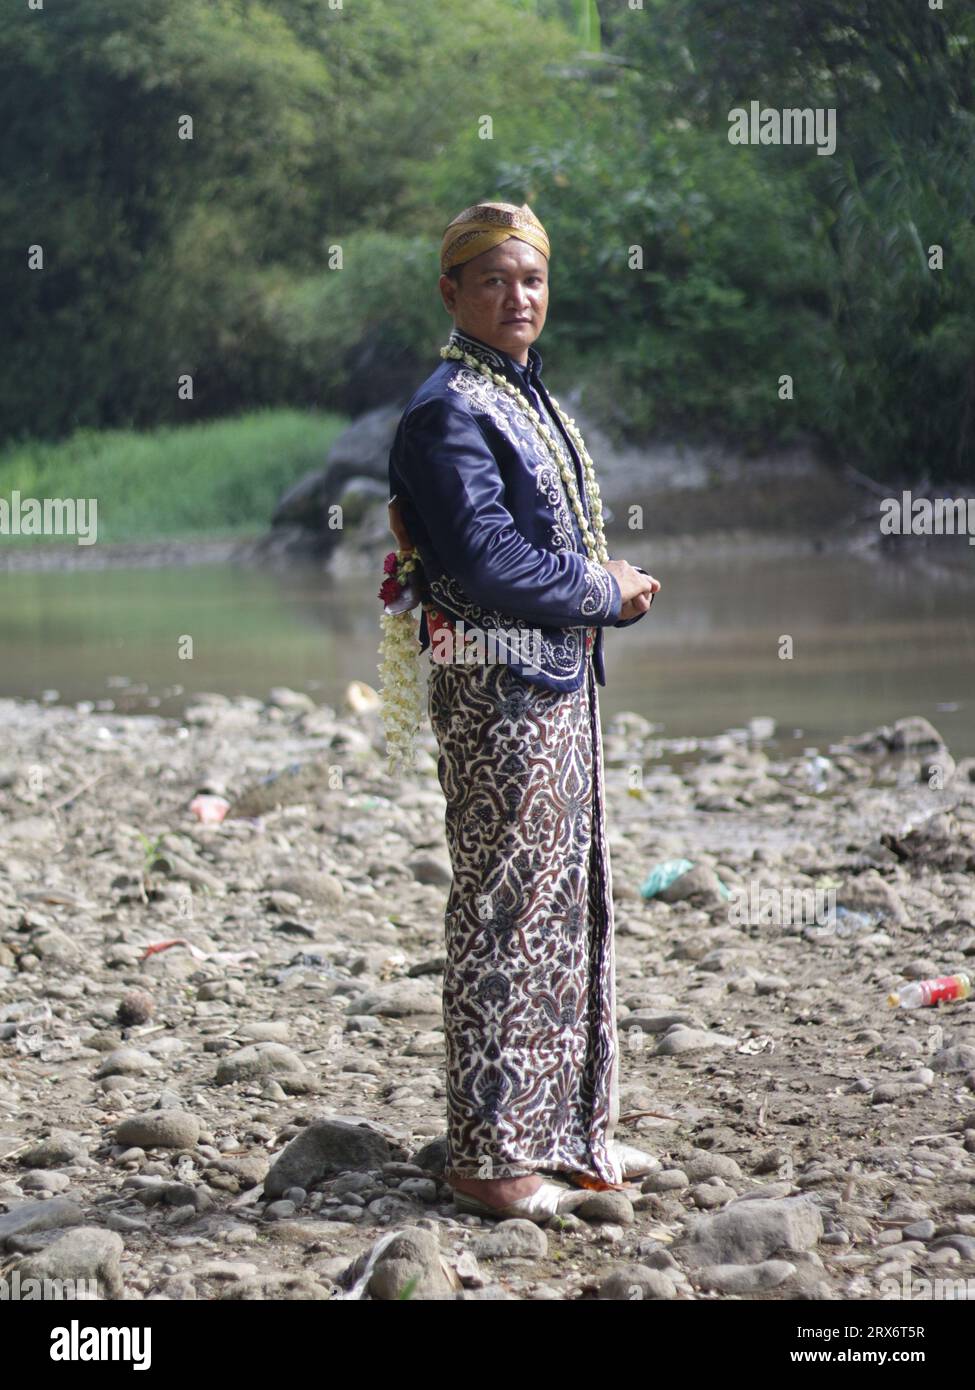 typical Central Javanese groom's clothing Stock Photo